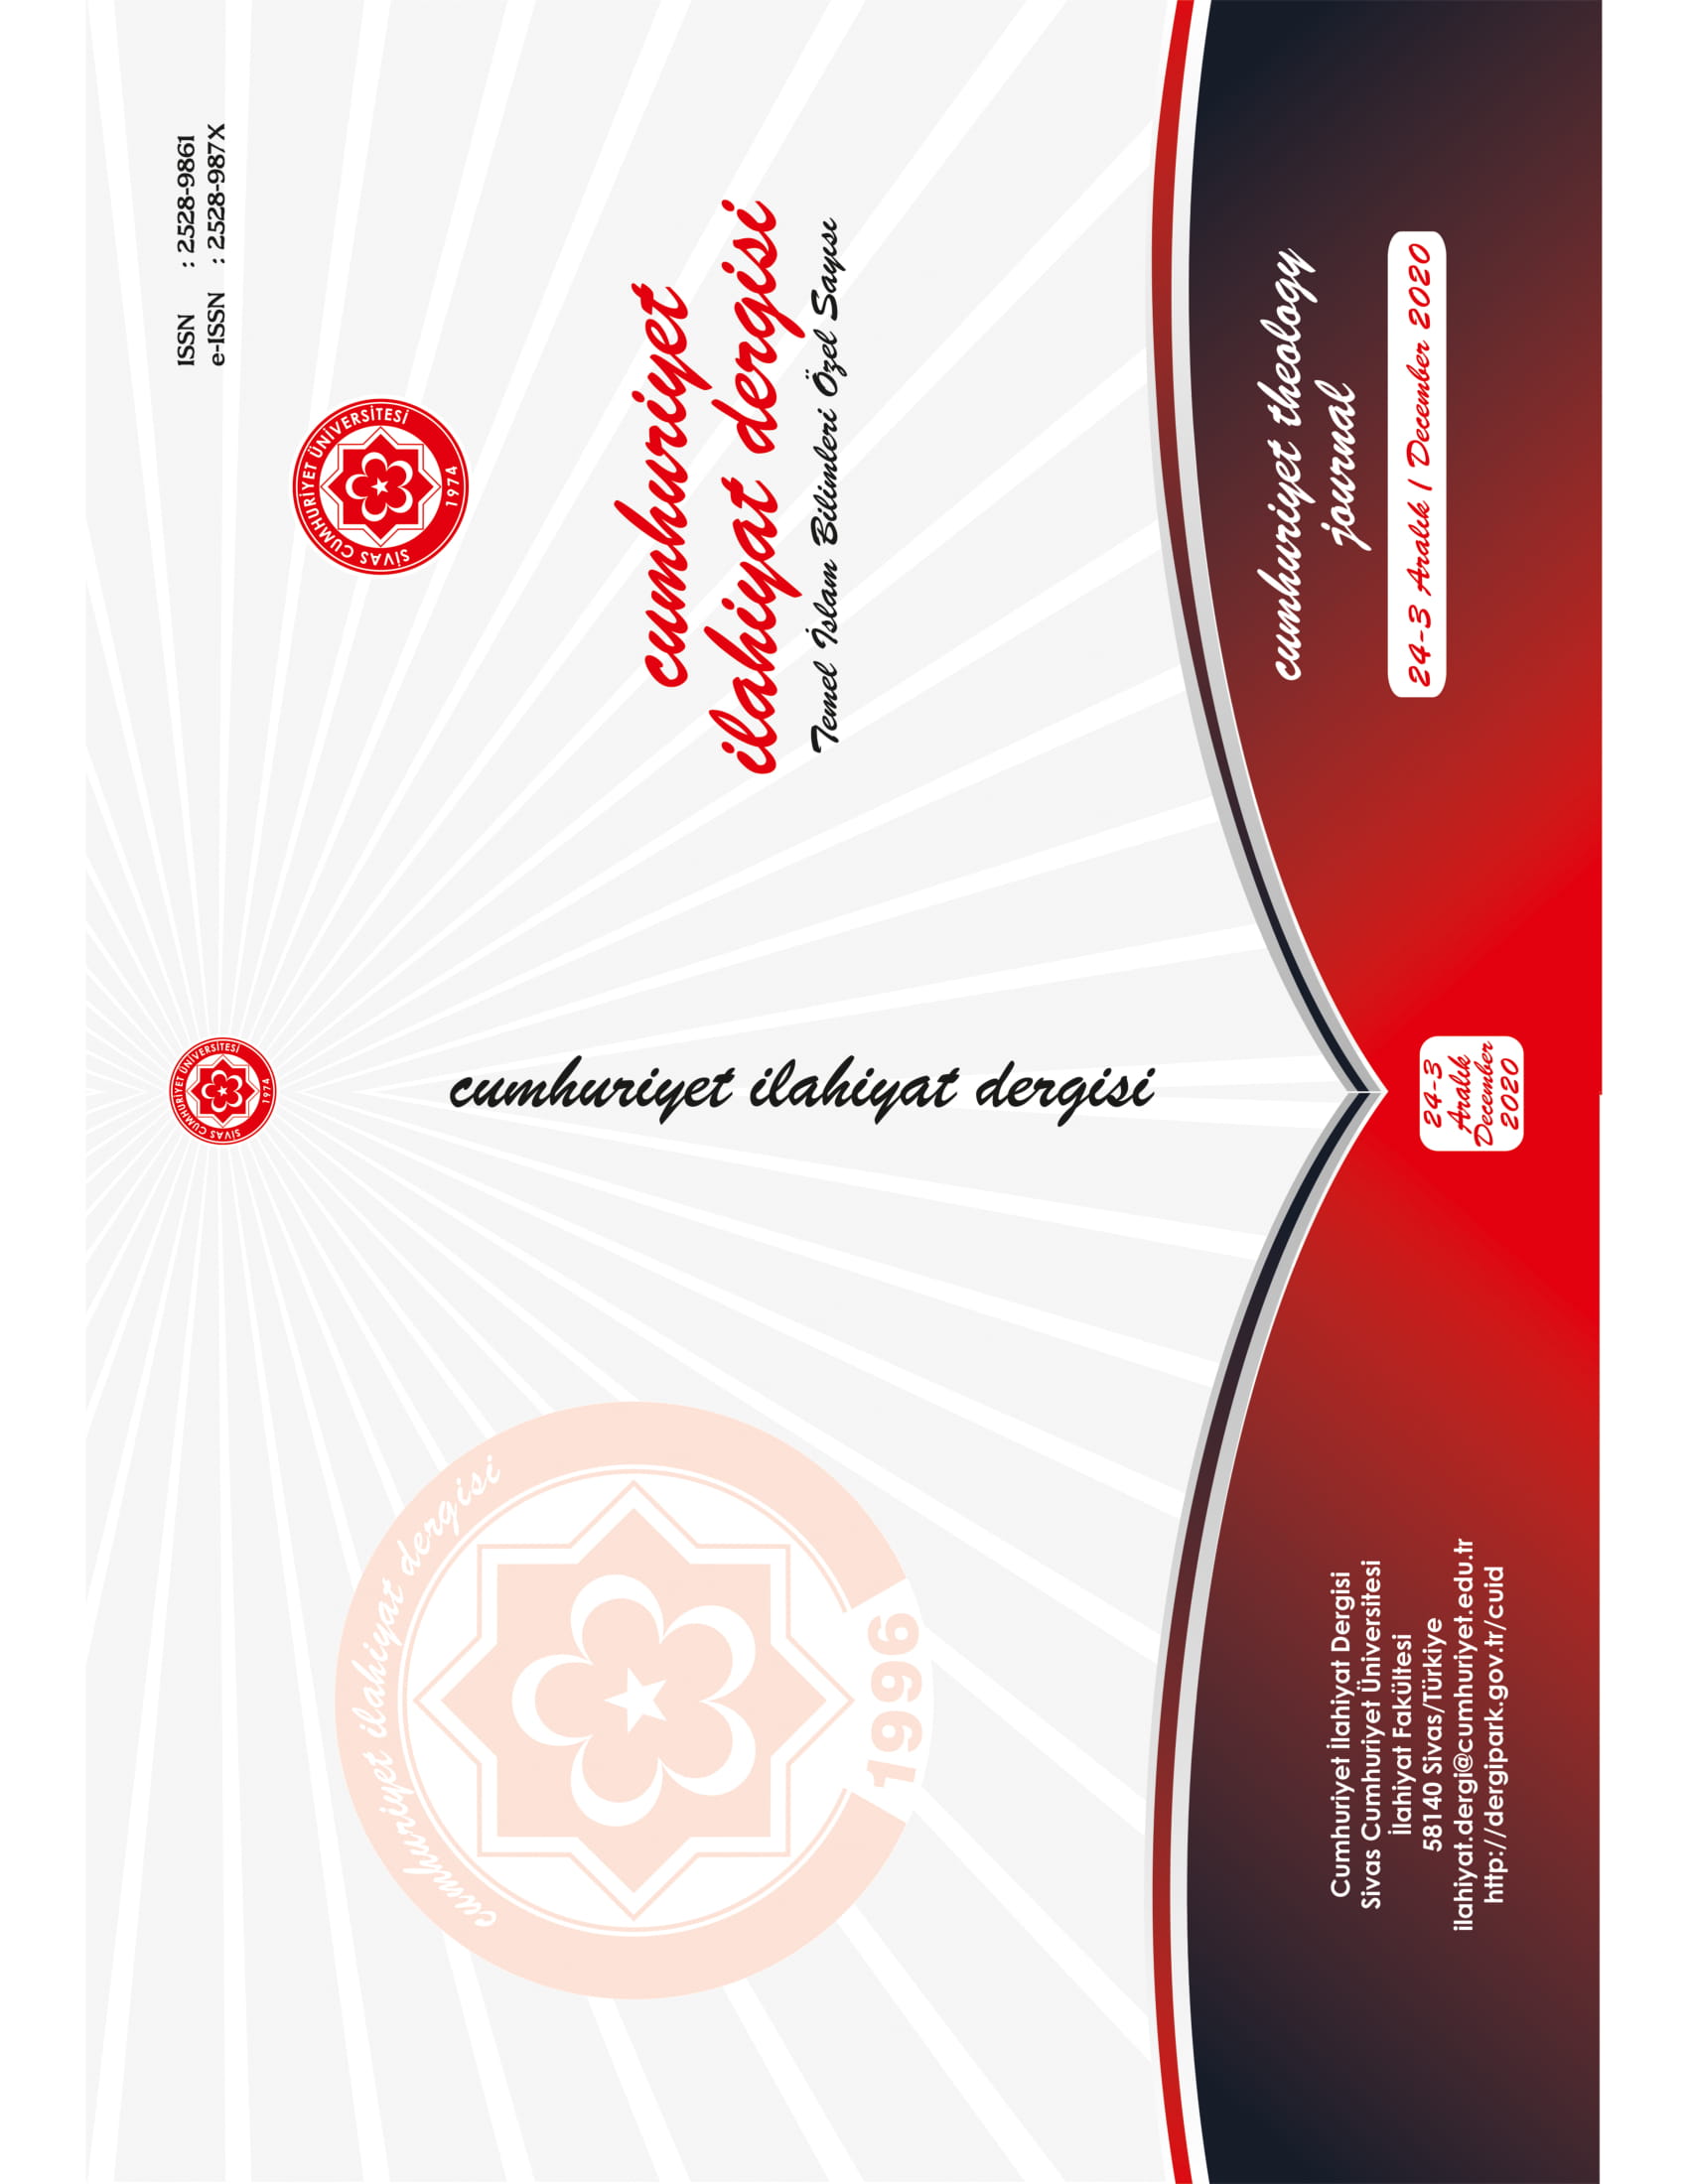 The Ḥadīth Science Entry to Indonesia and the Contribution of Mahfudz Tremas and Hasyim Asy’ari to Its Development Cover Image